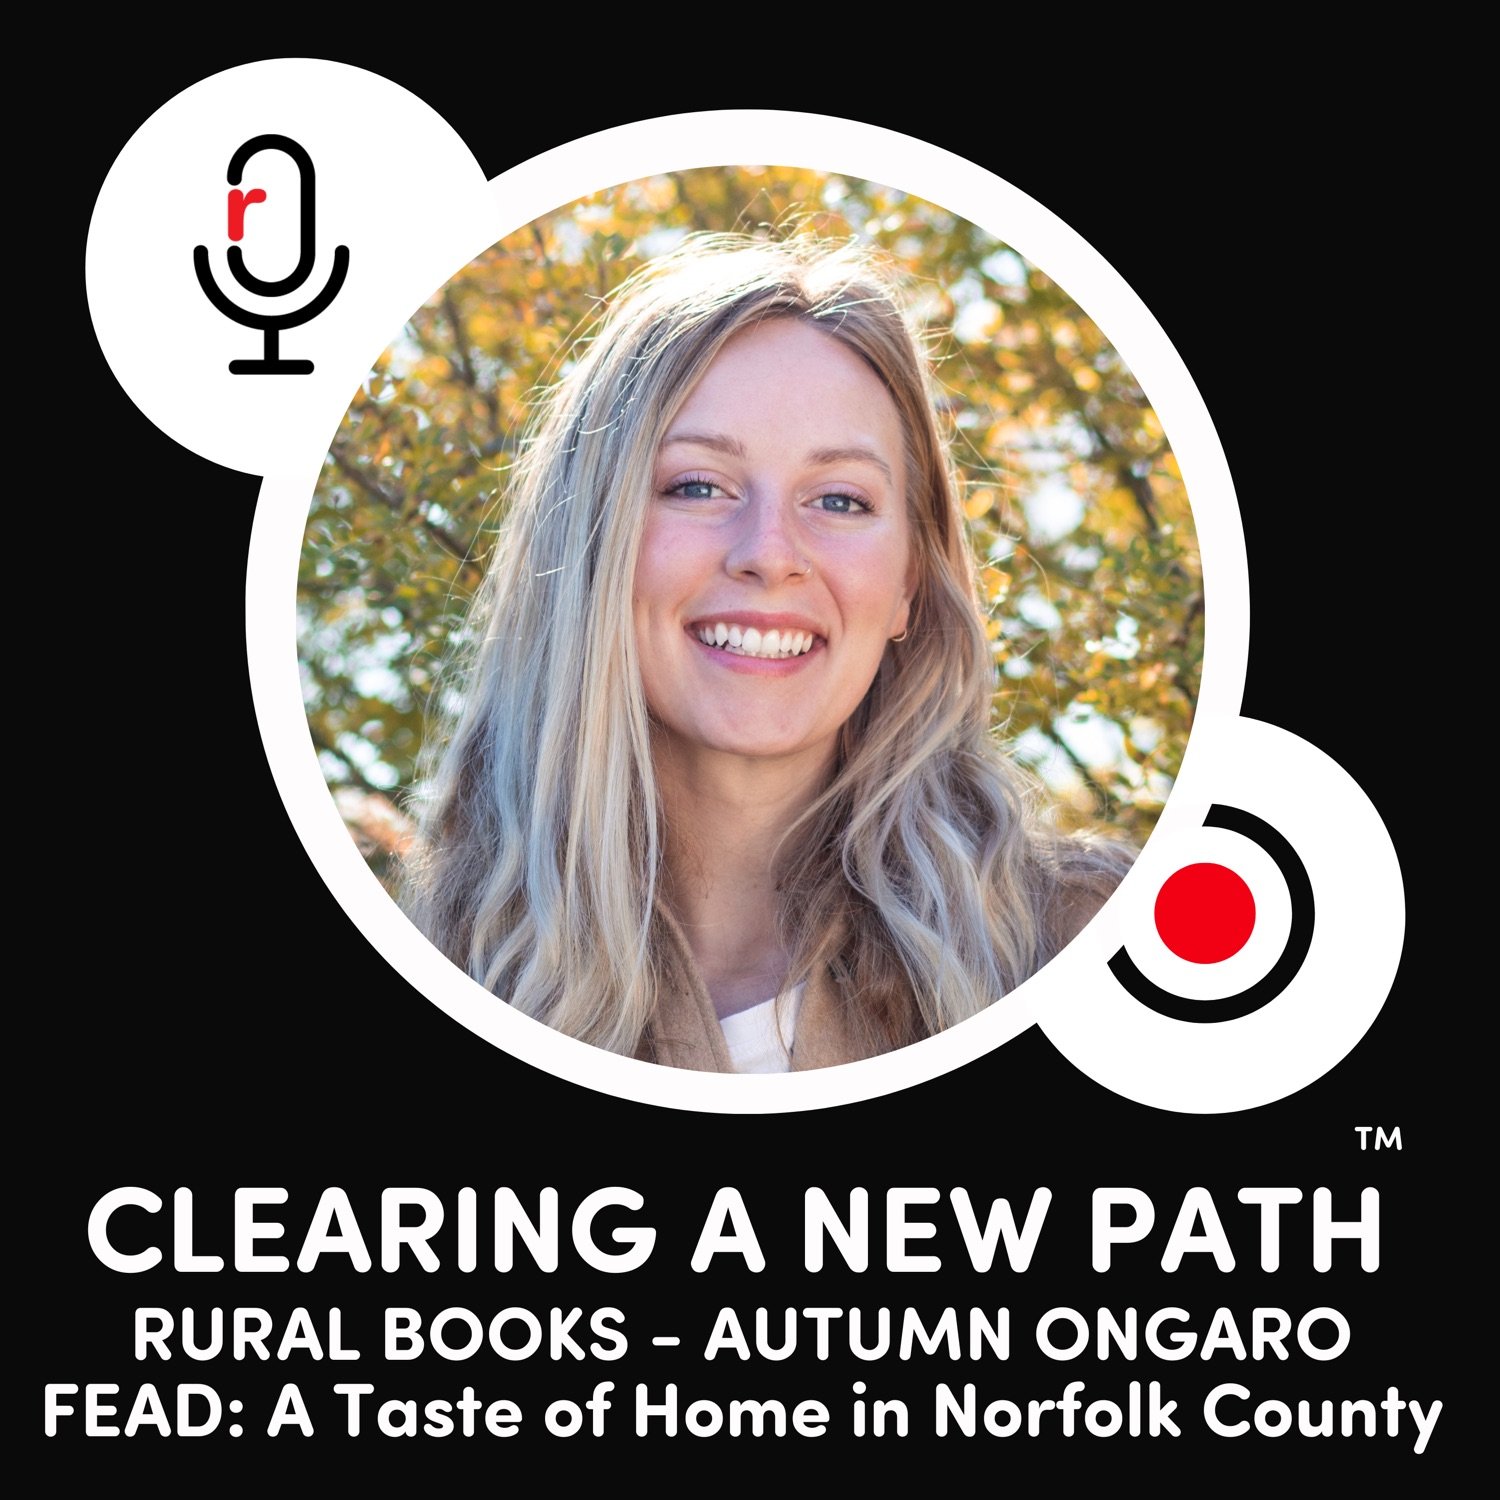 RURAL BOOKS - AUTUMN ONGARO - FEAD: A Taste of Home in Norfolk County